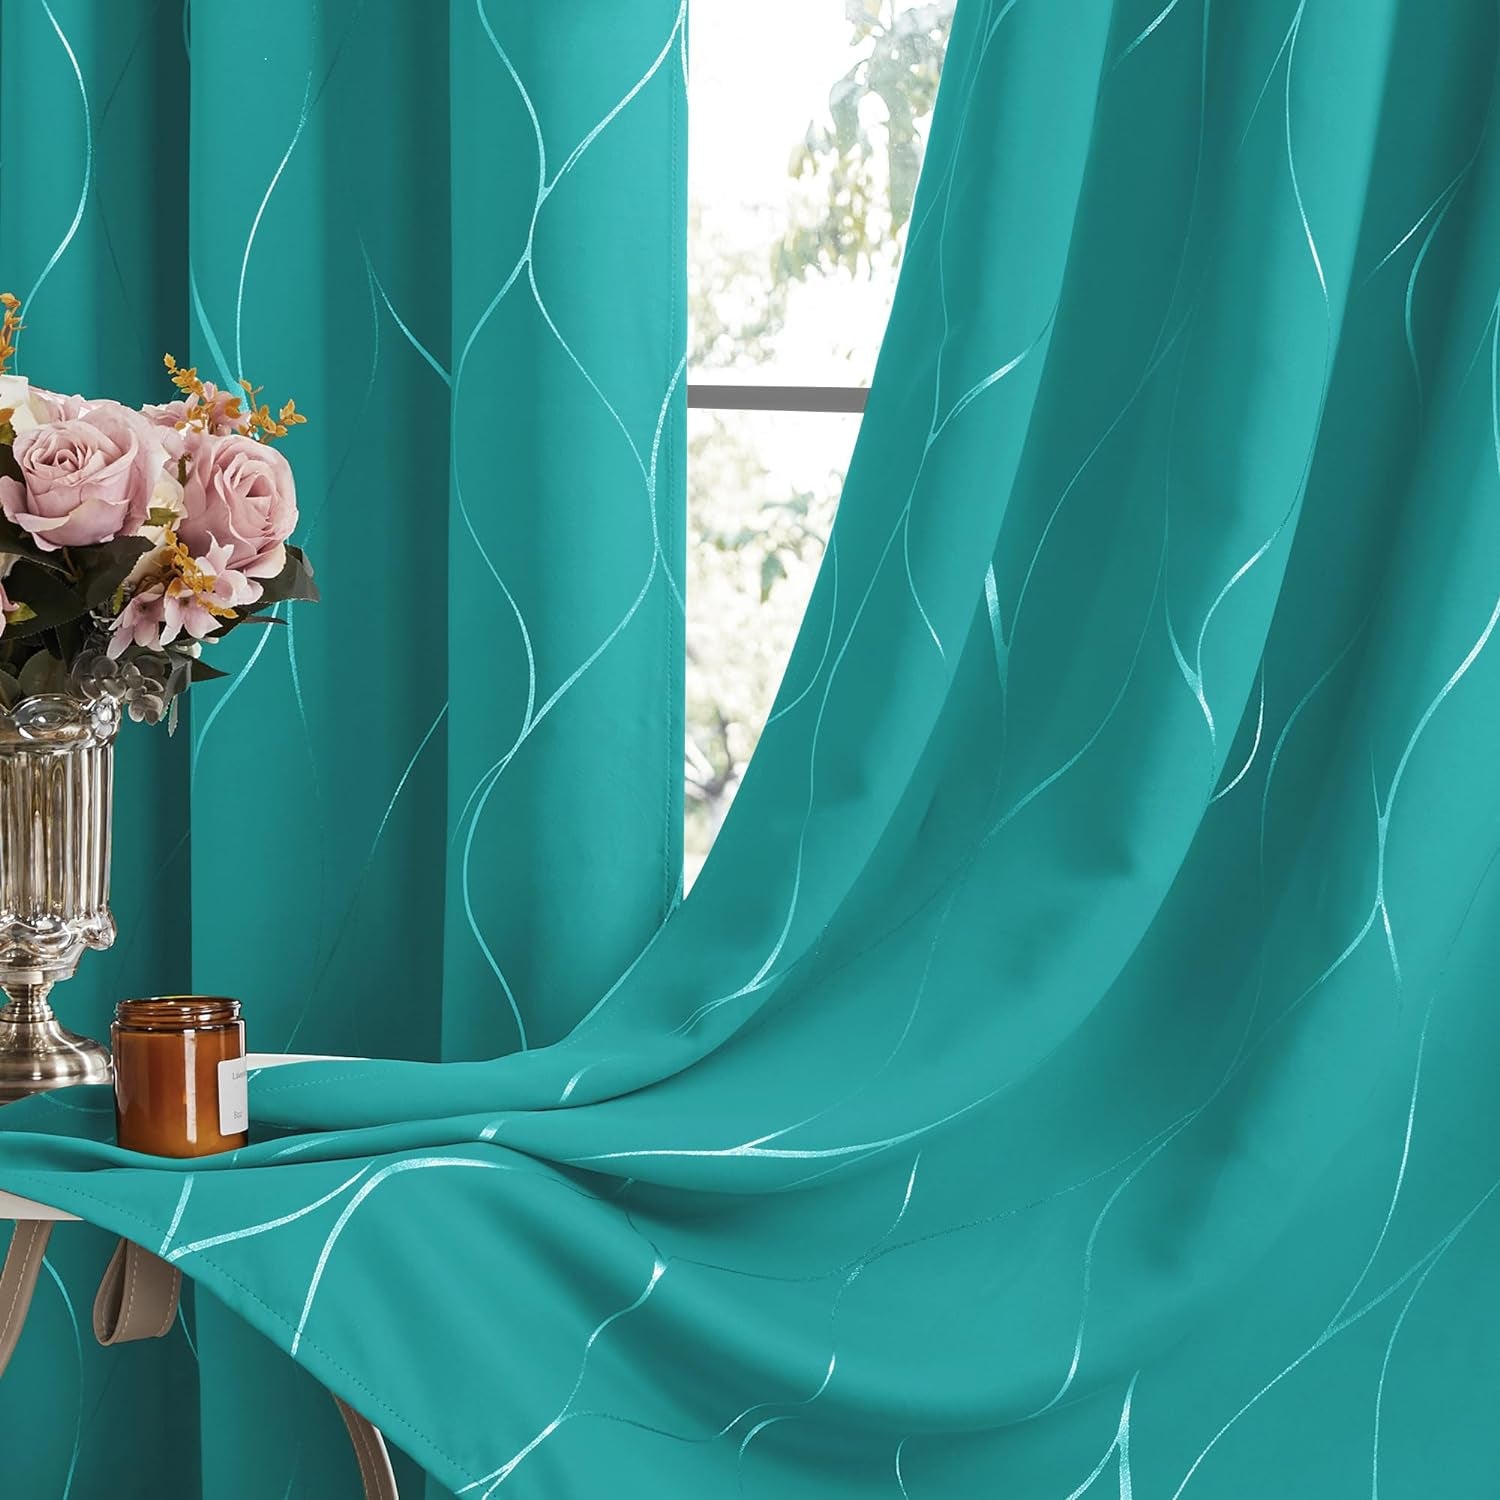 Deconovo Blackout Curtains with Foil Wave Pattern, Grommet Curtain Room Darkening Window Panels, Thermal Insulated Curtain Drapes for Nursery Room (42W X 54L Inch, 2 Panels, Turquoise)  DECONOVO   